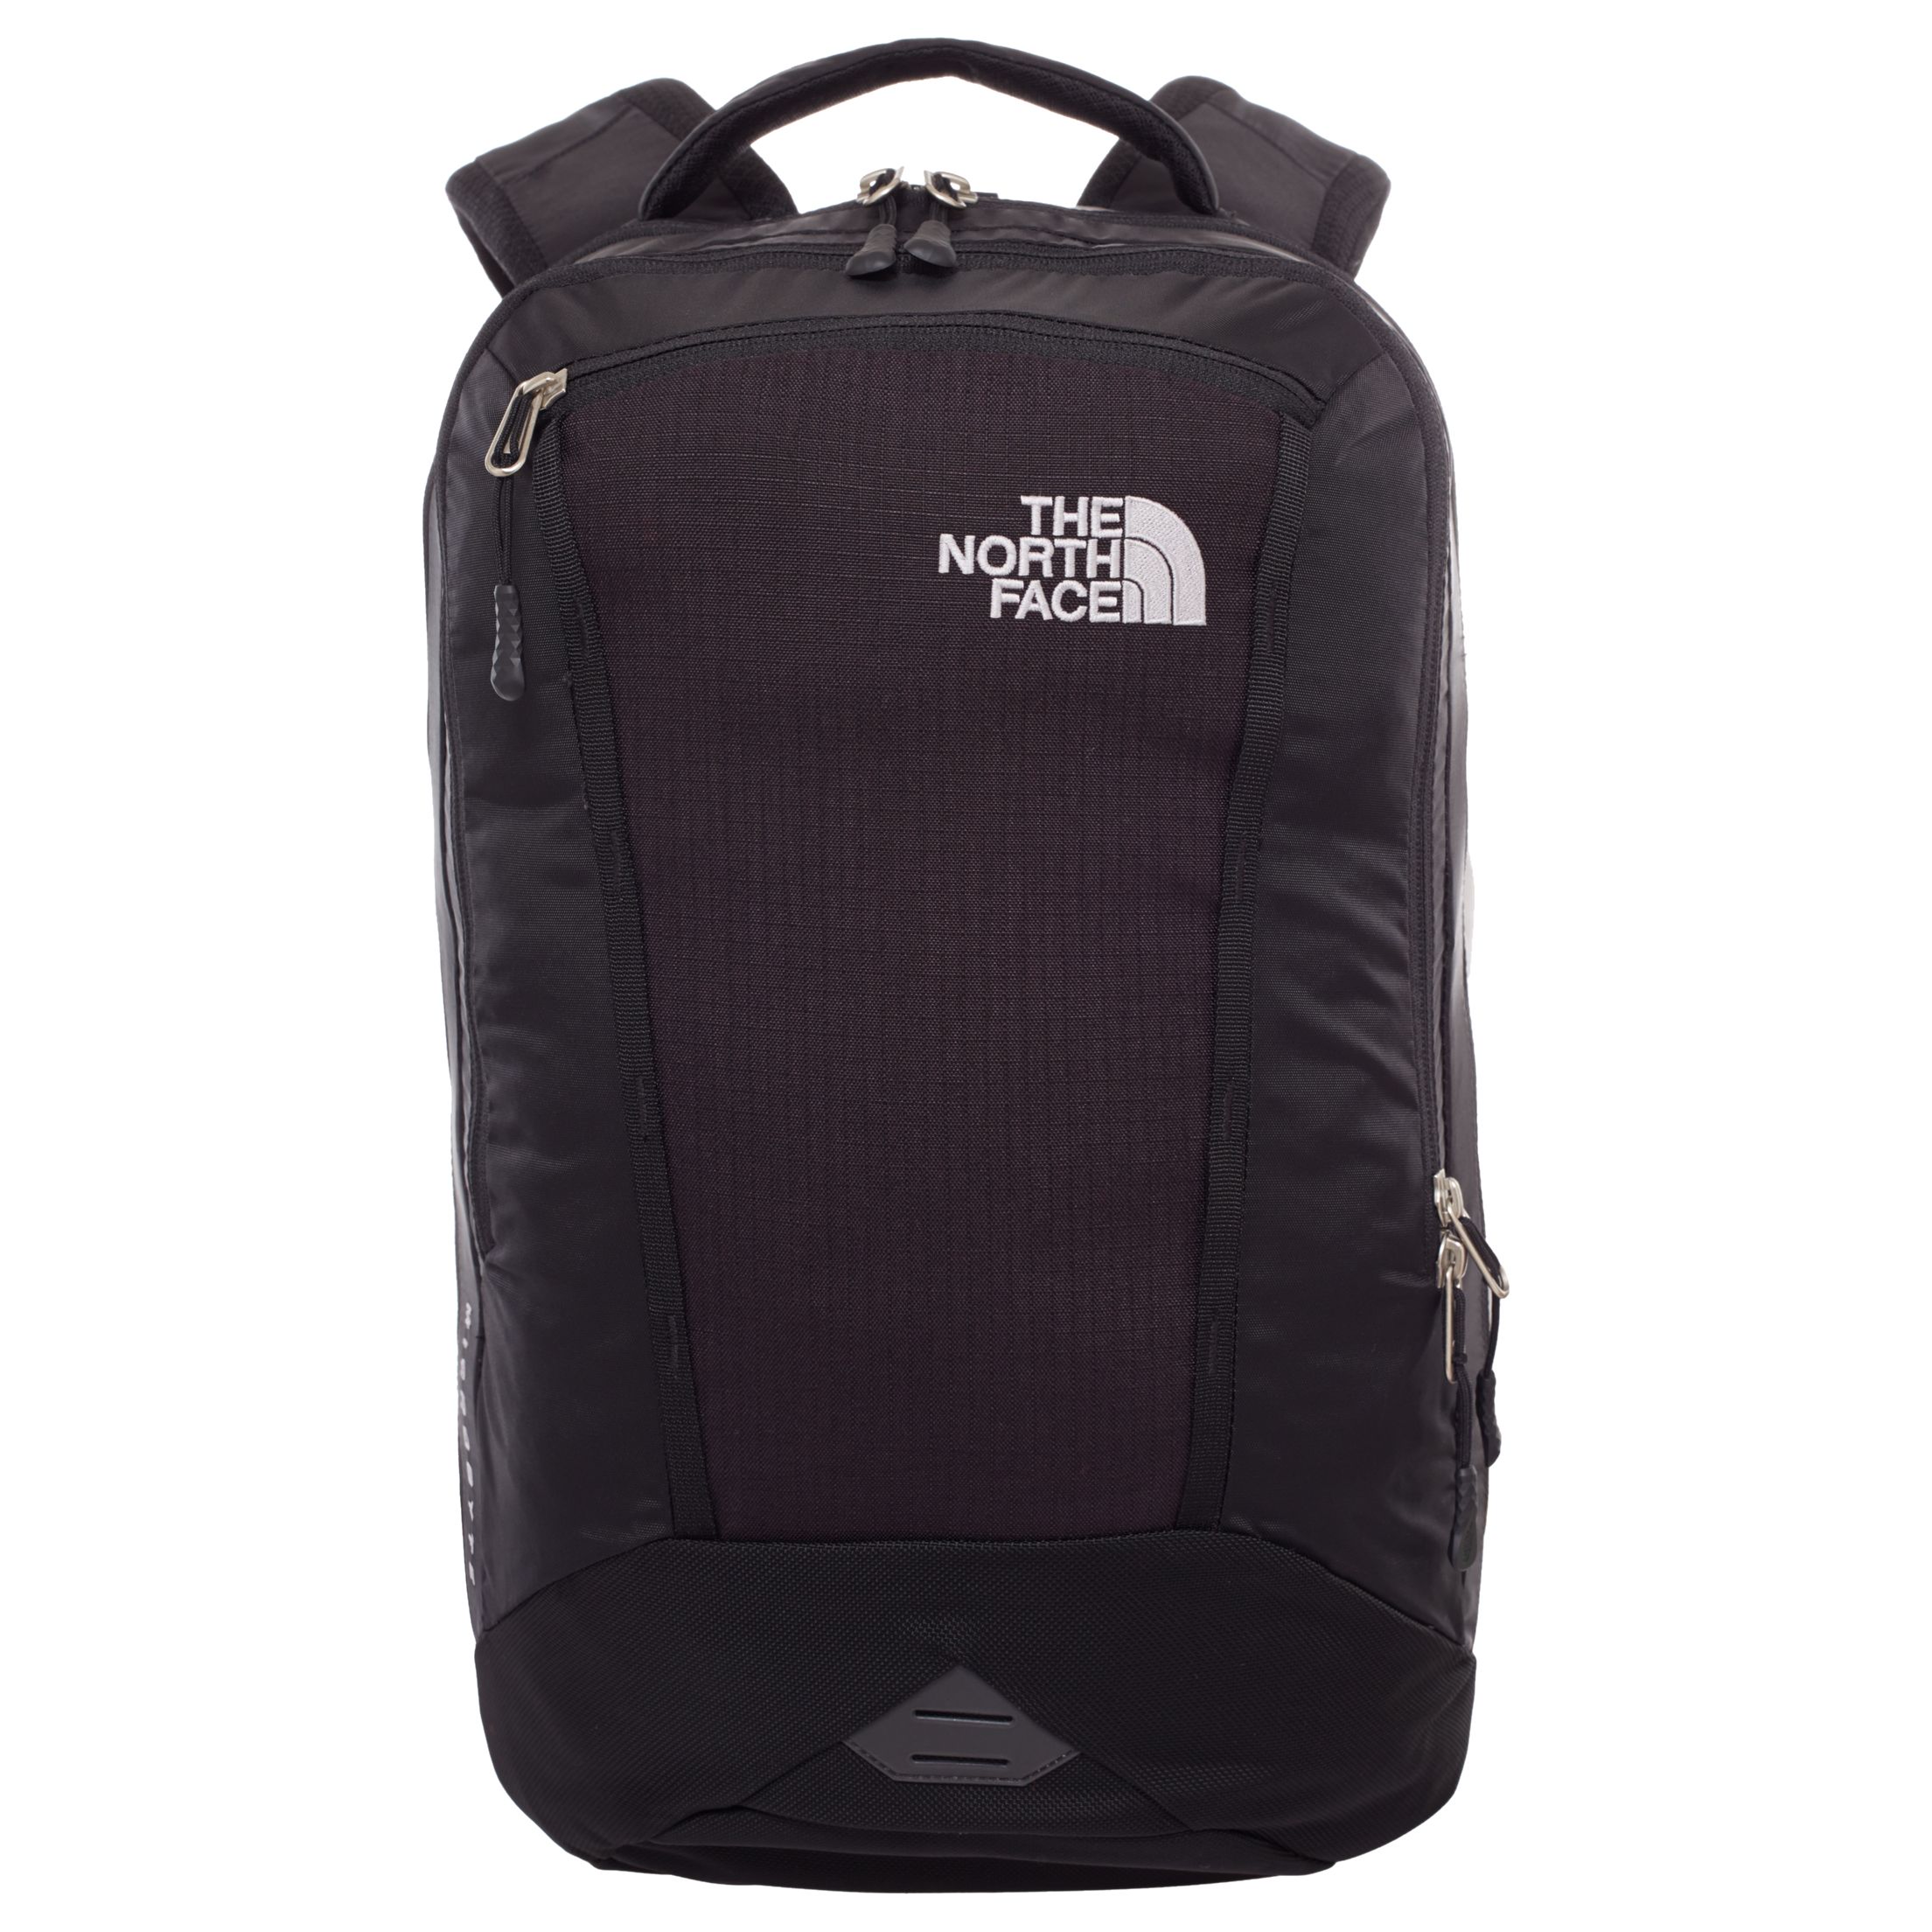 The North Face Microbyte Backpack, Black